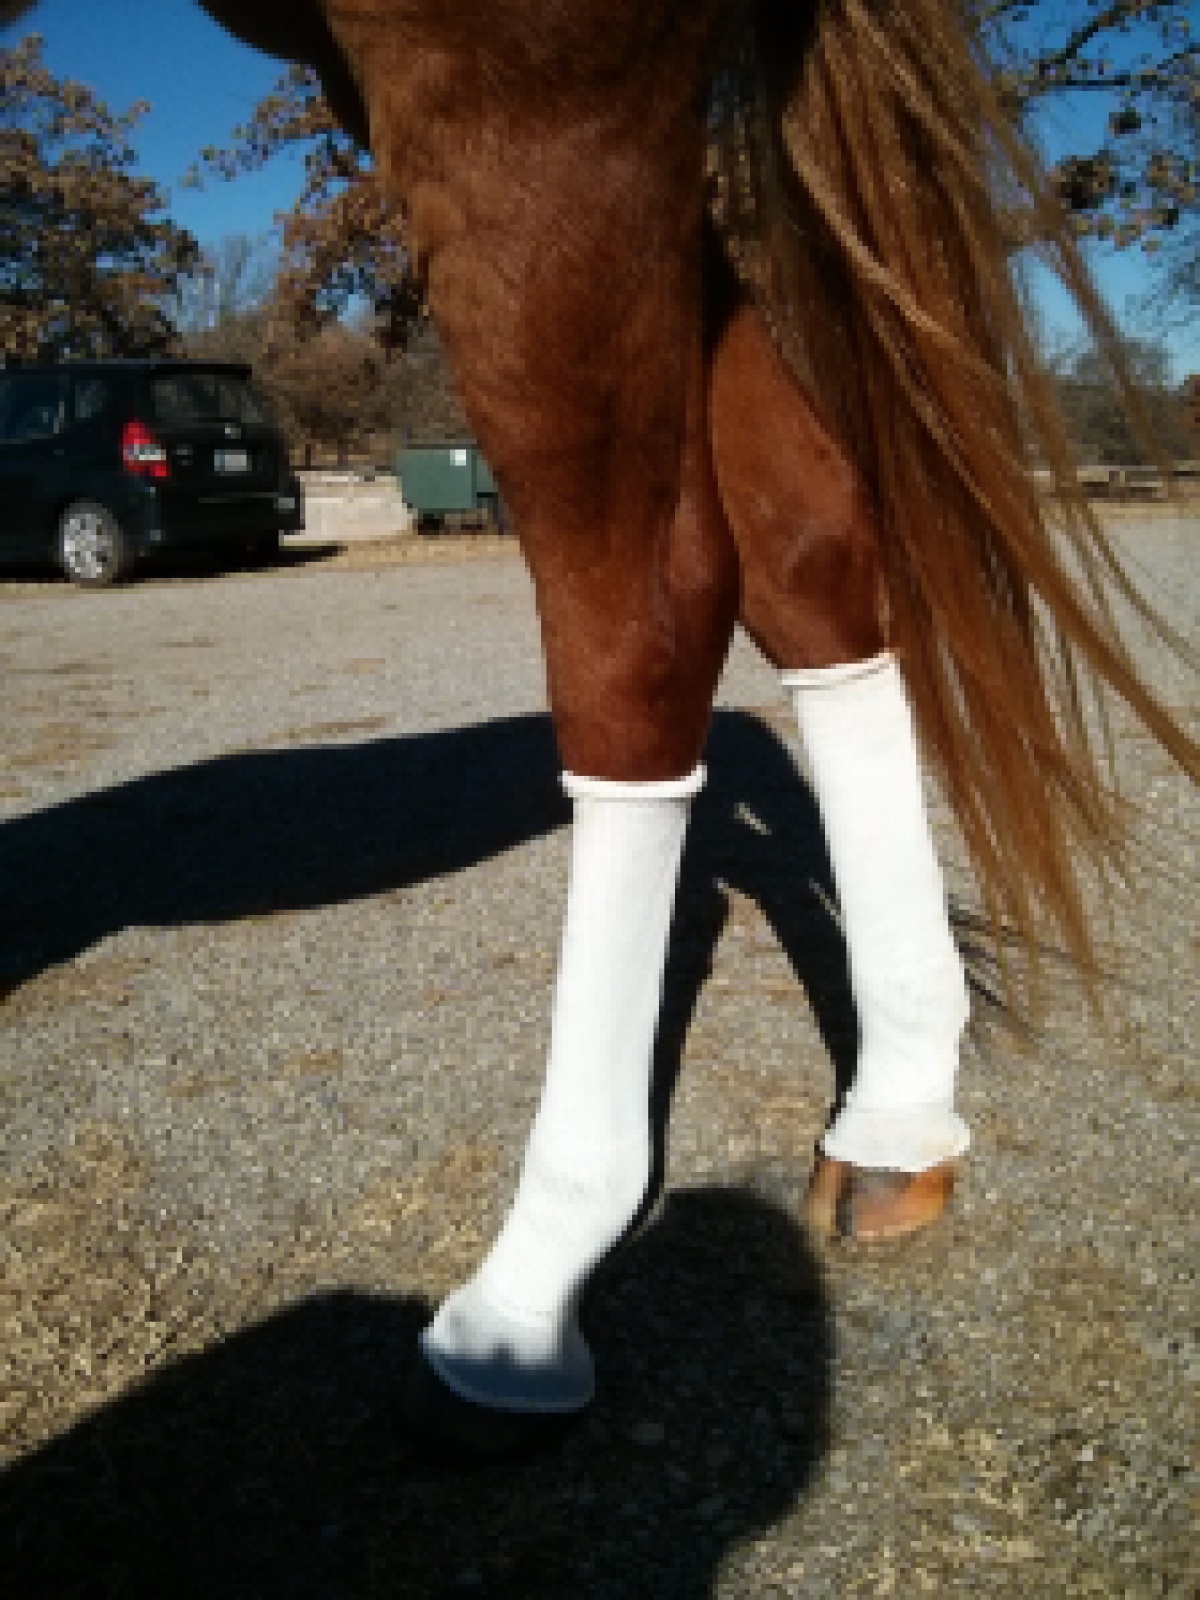 Sox for horses can help with scratches.